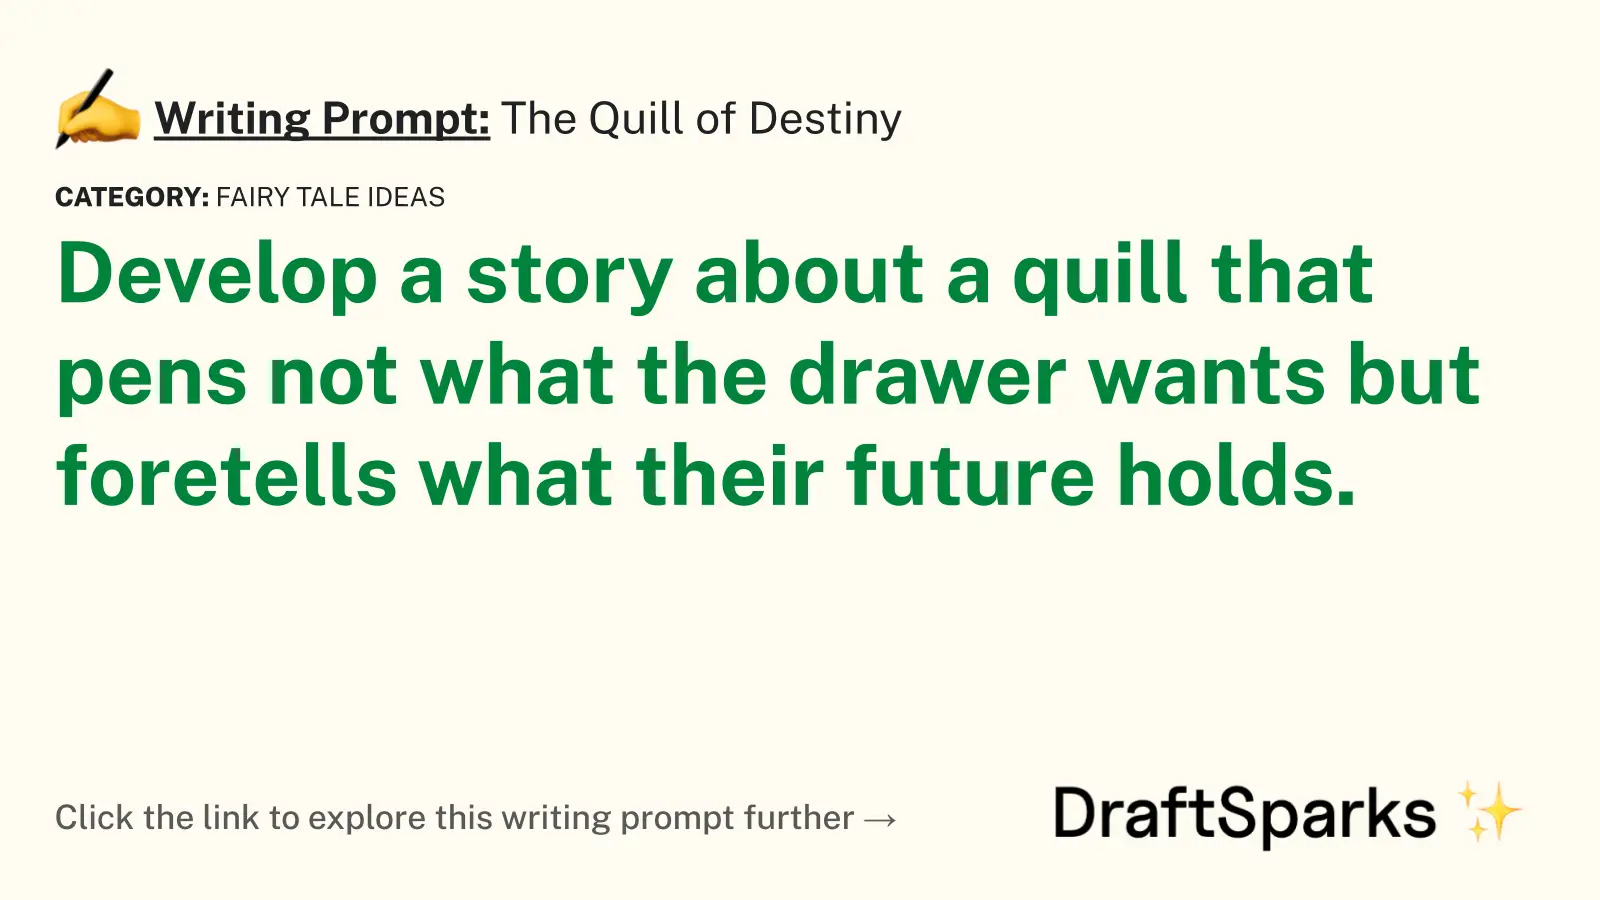 The Quill of Destiny